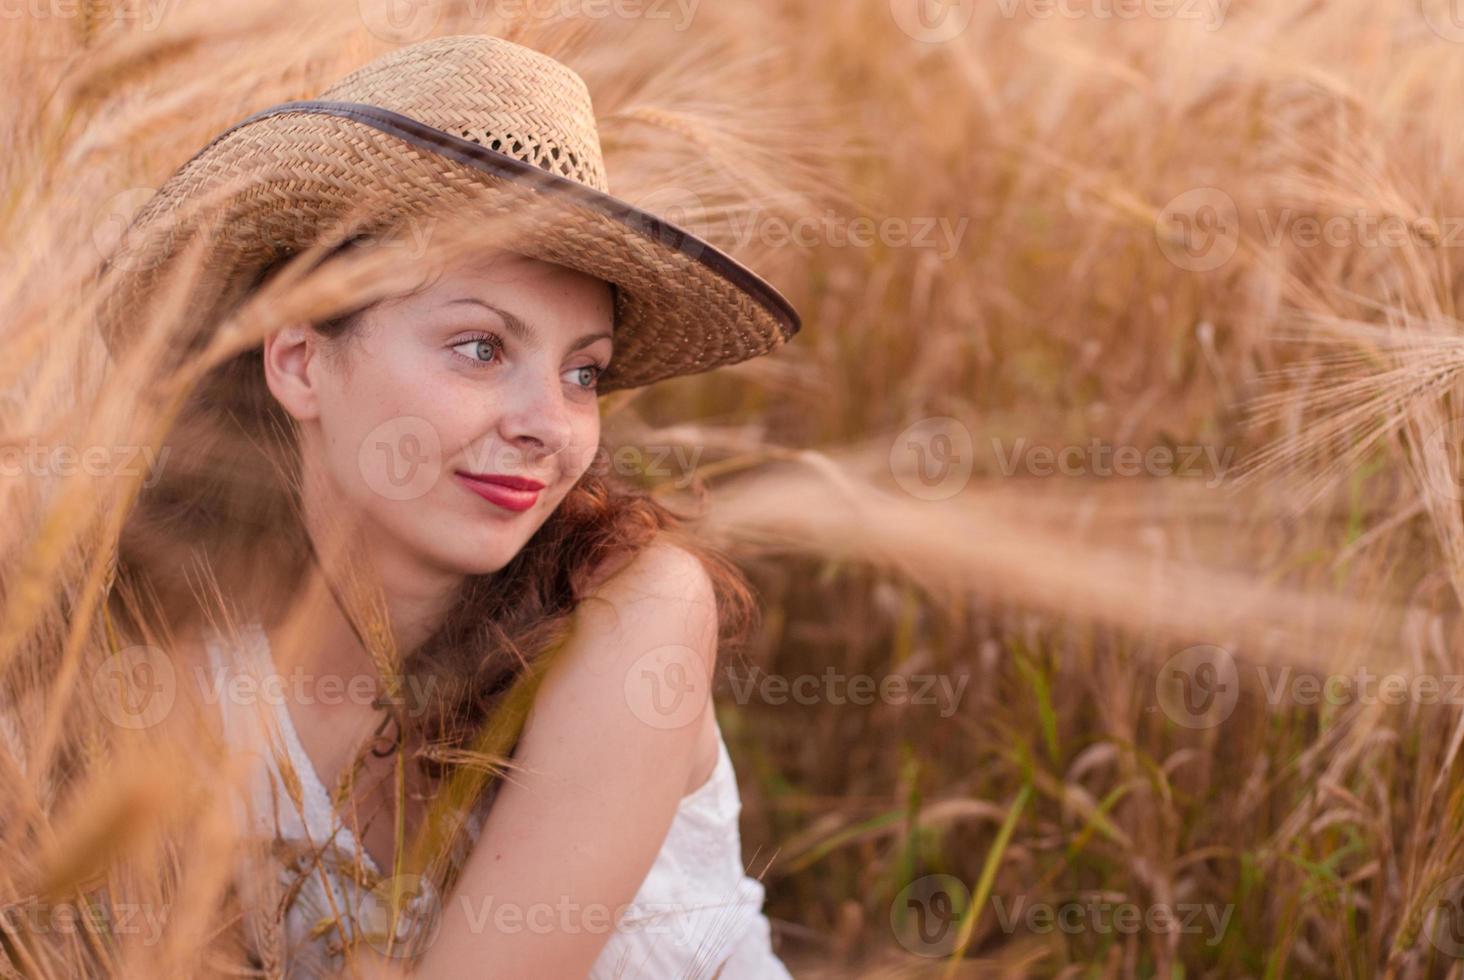 Woman in the wheat field photo